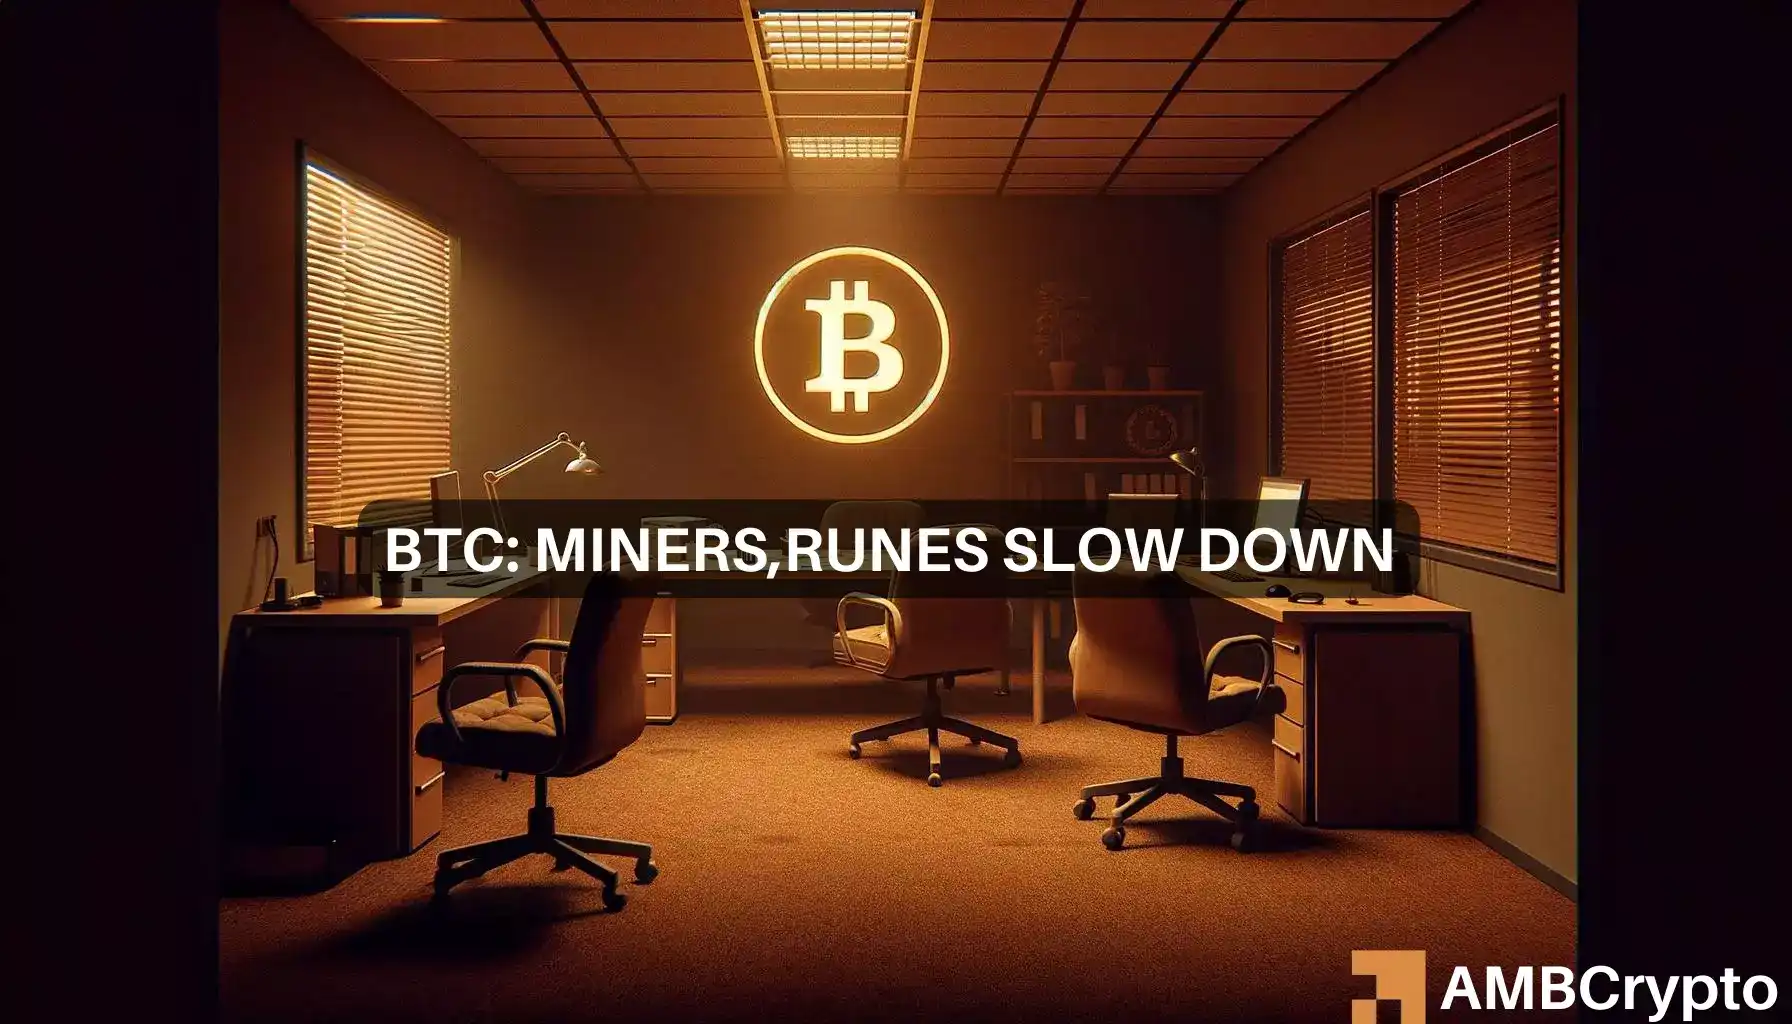 Bitcoin Runes fade away: Examining the effects on BTC miners